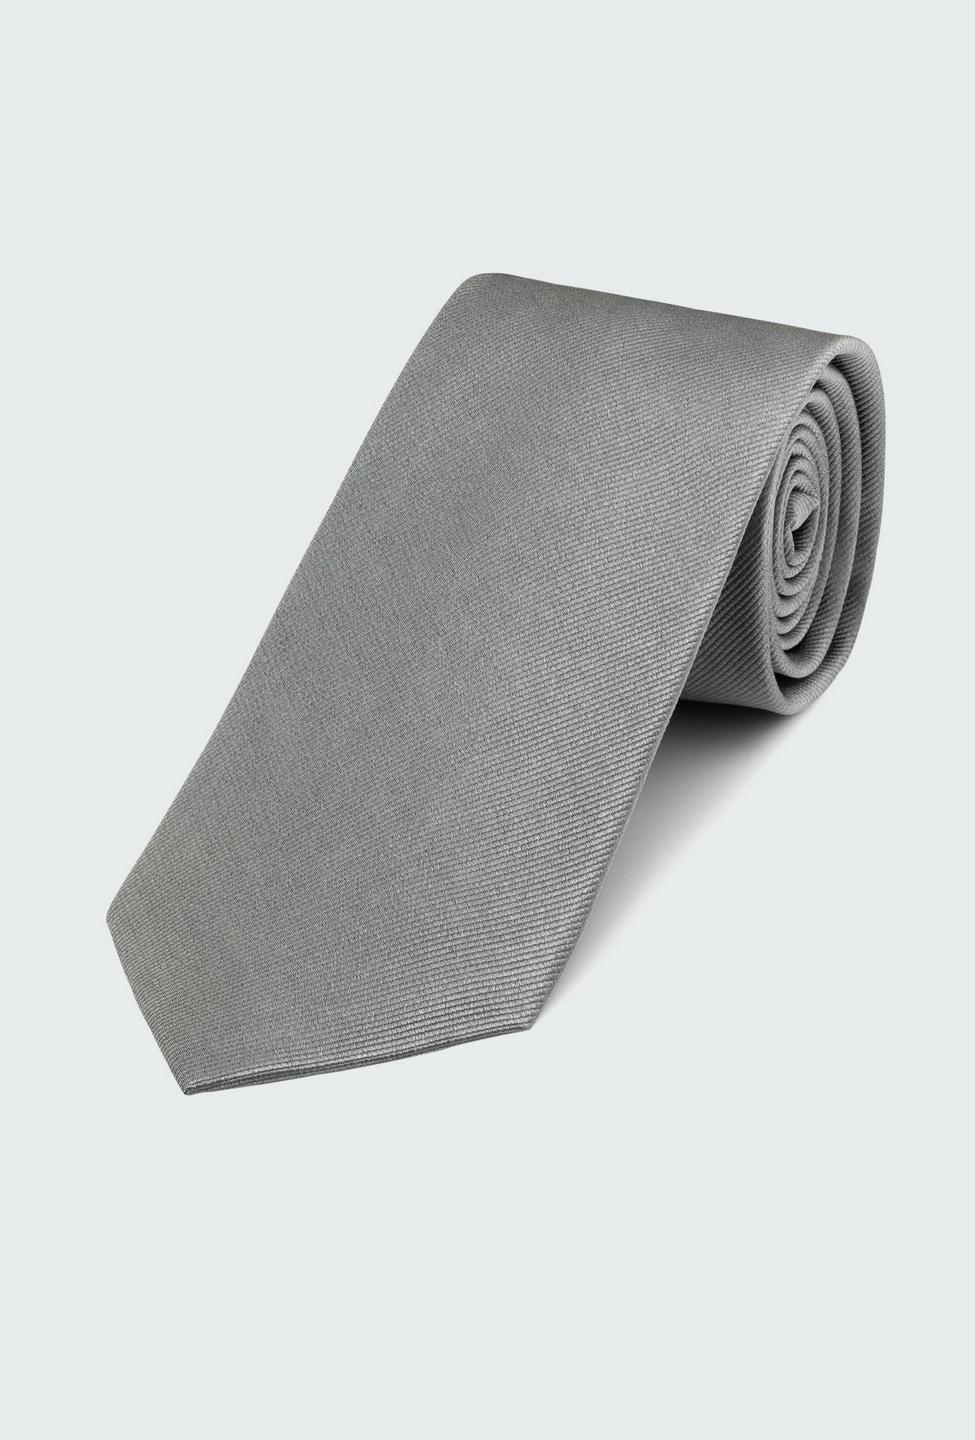 Gray tie - Solid Design from Indochino Collection